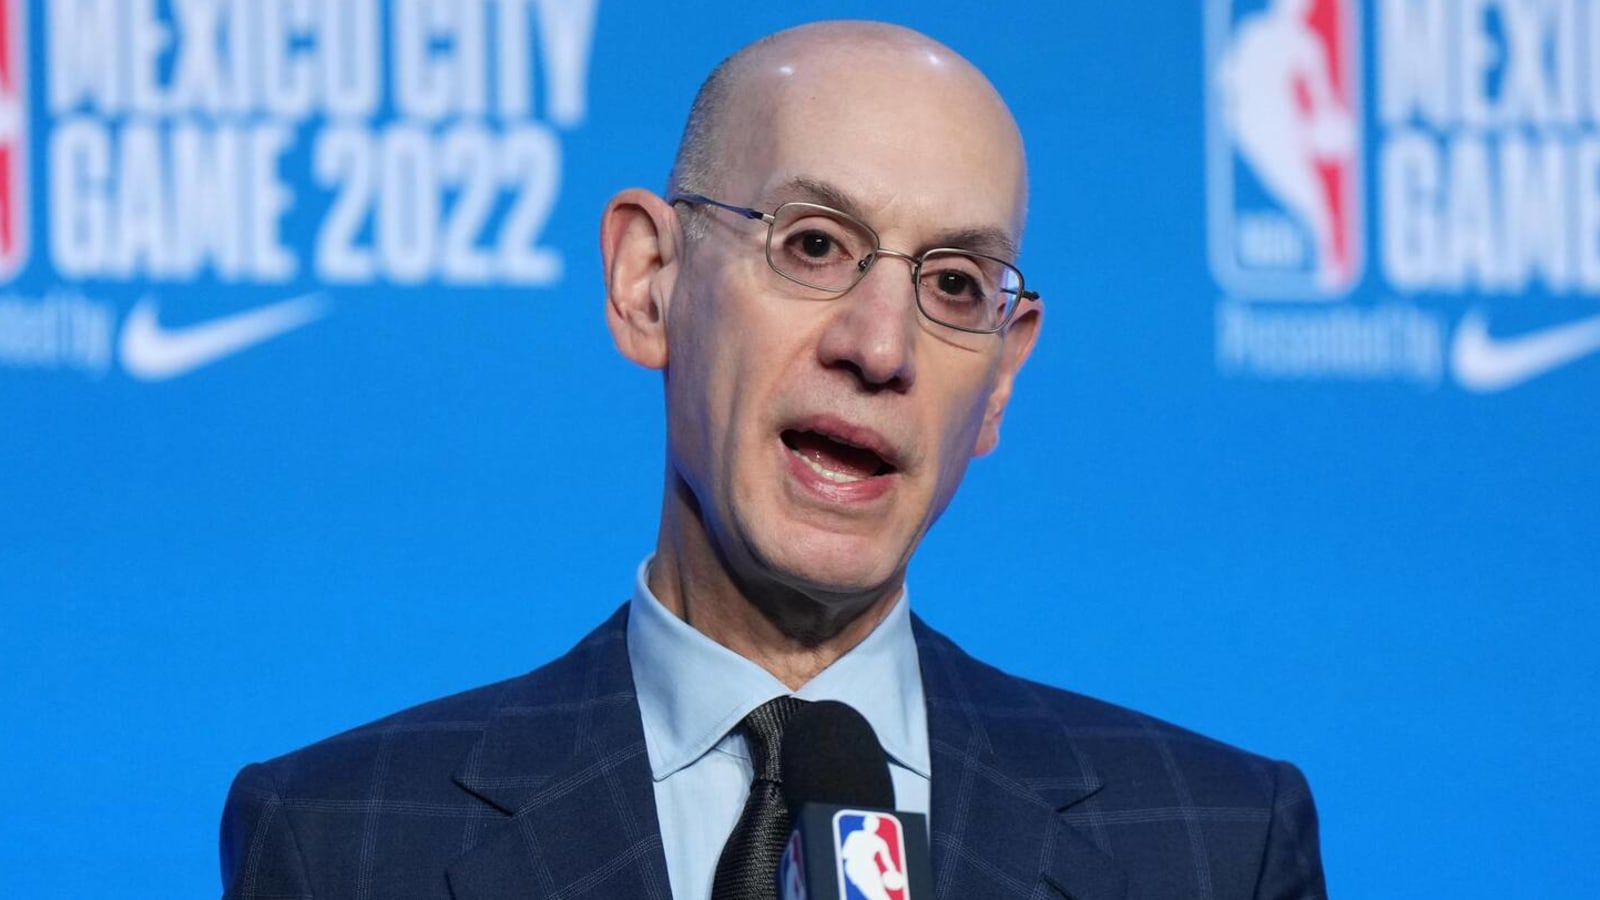 Adam Silver has strong words for Ja Morant after latest incident